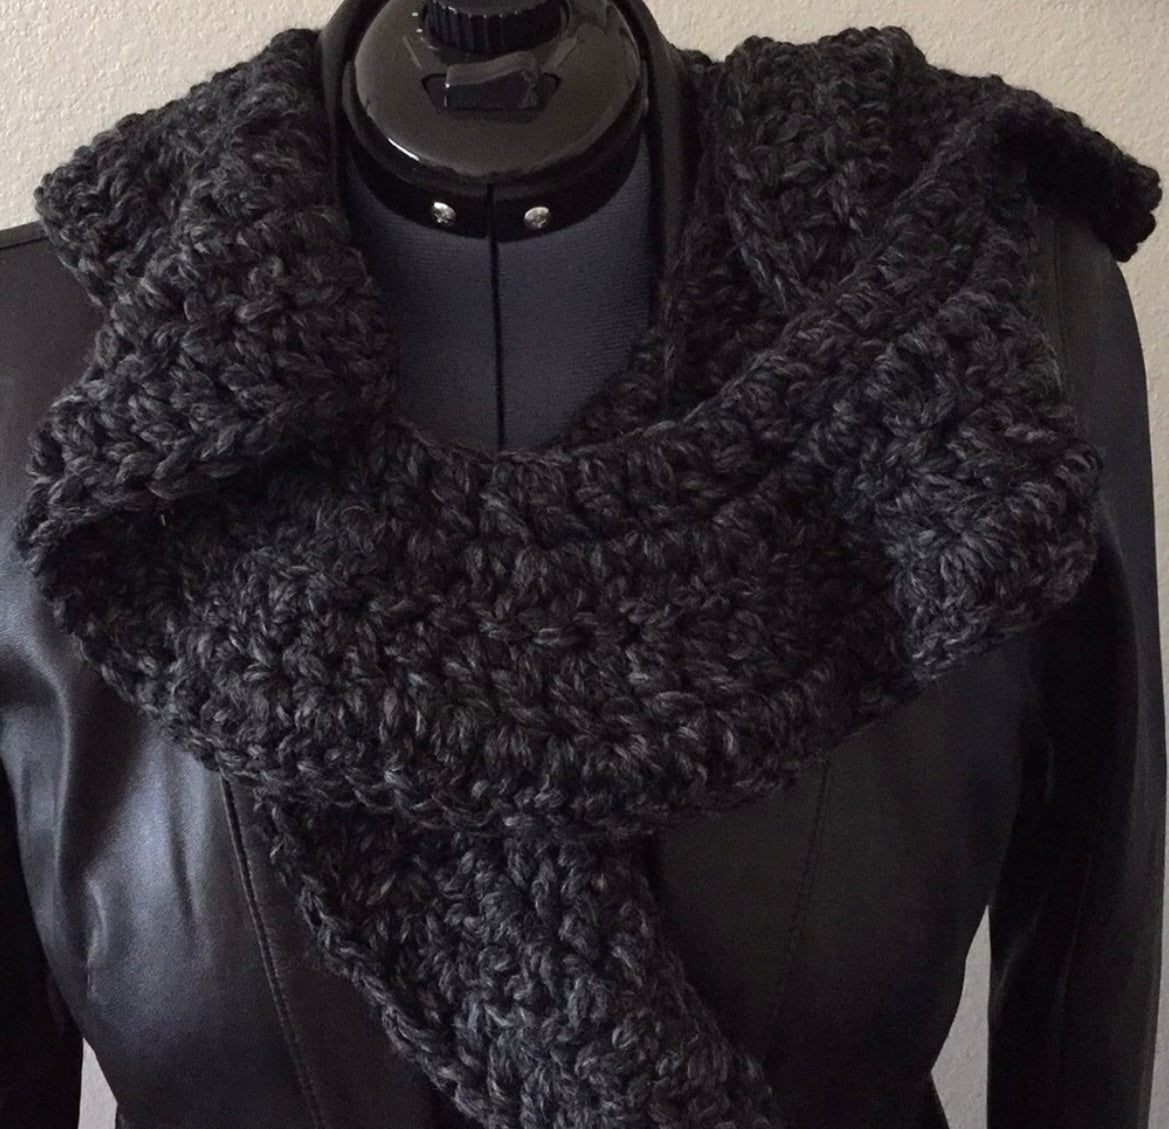 Extra Warm Crochet Knit Chunky Ruffle Scarf Hand Crafted Marbled Charcoal Grey Flirty Fall Winter--displayed on black leather jacket